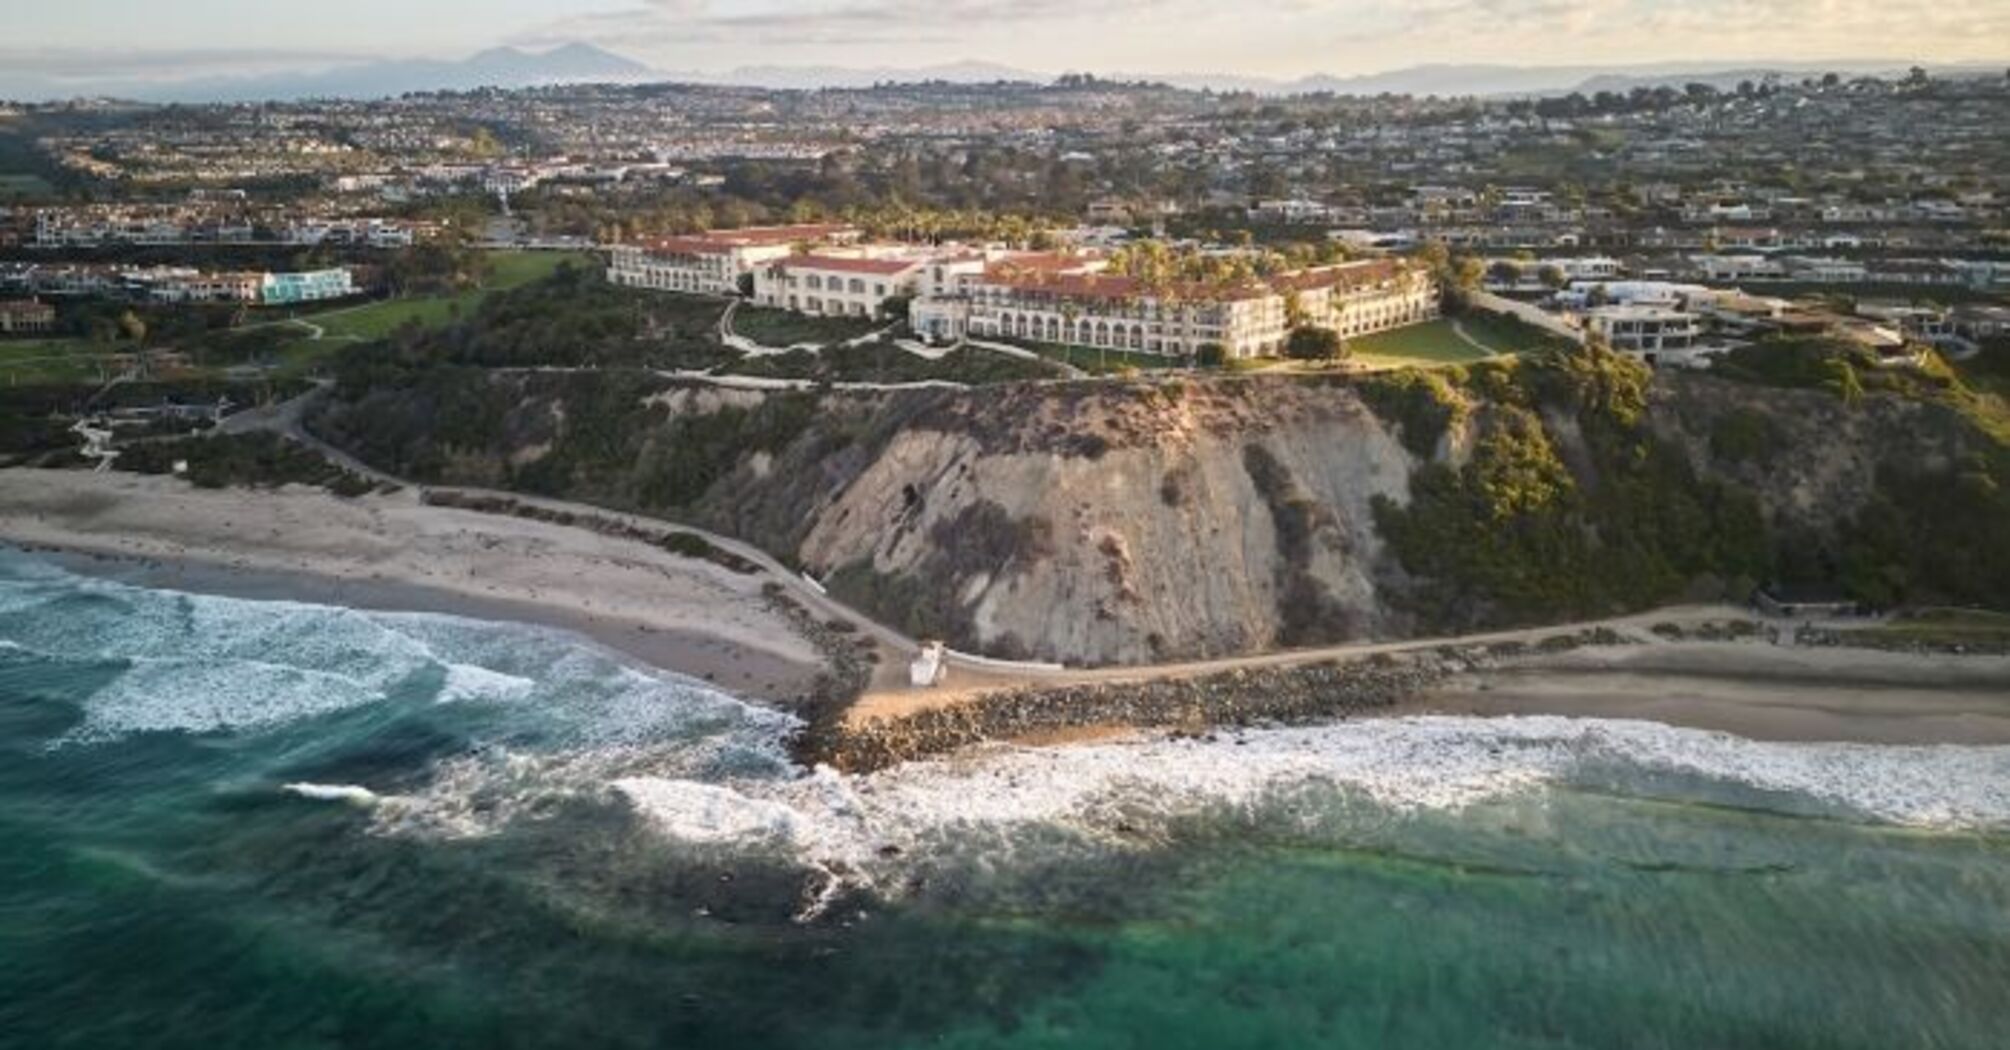 4 reasons to spend your winter vacation at The Ritz-Carlton, Laguna Niguel